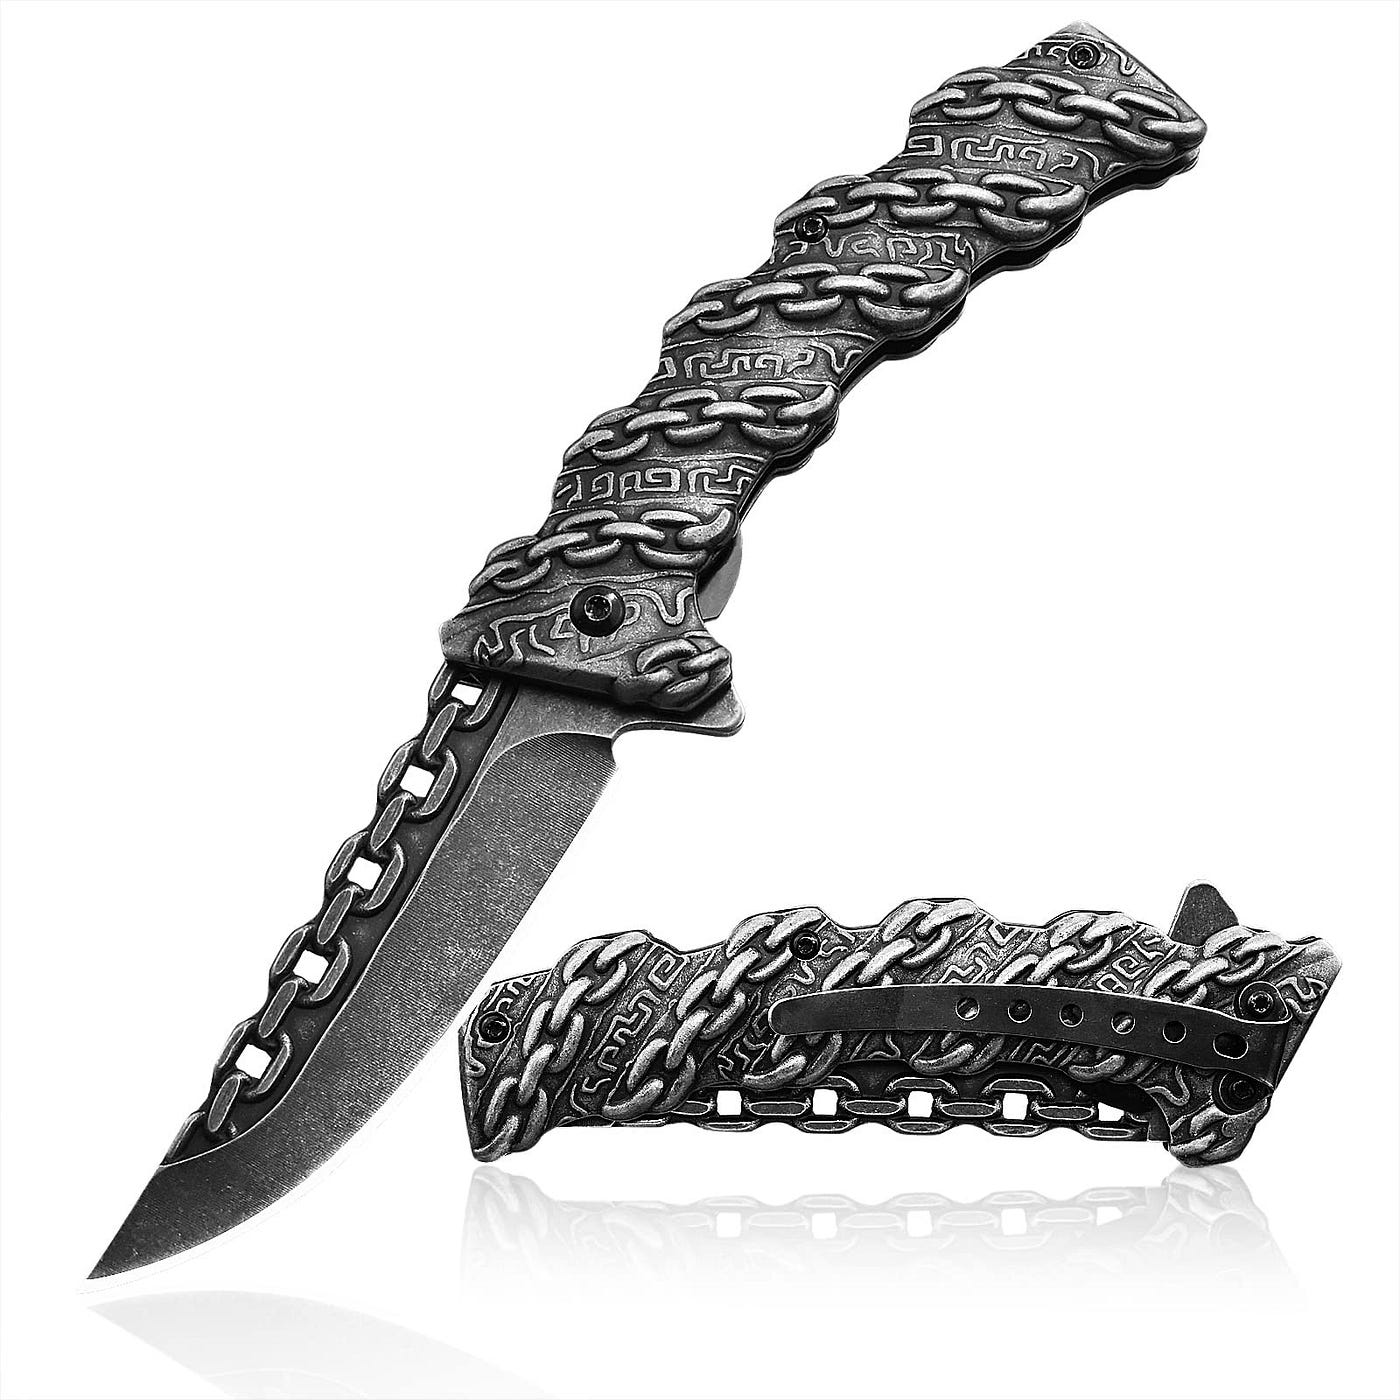 Top 10 Knife Gift Ideas for Him: Show Your Love on Valentine's Day, by Dre  B.